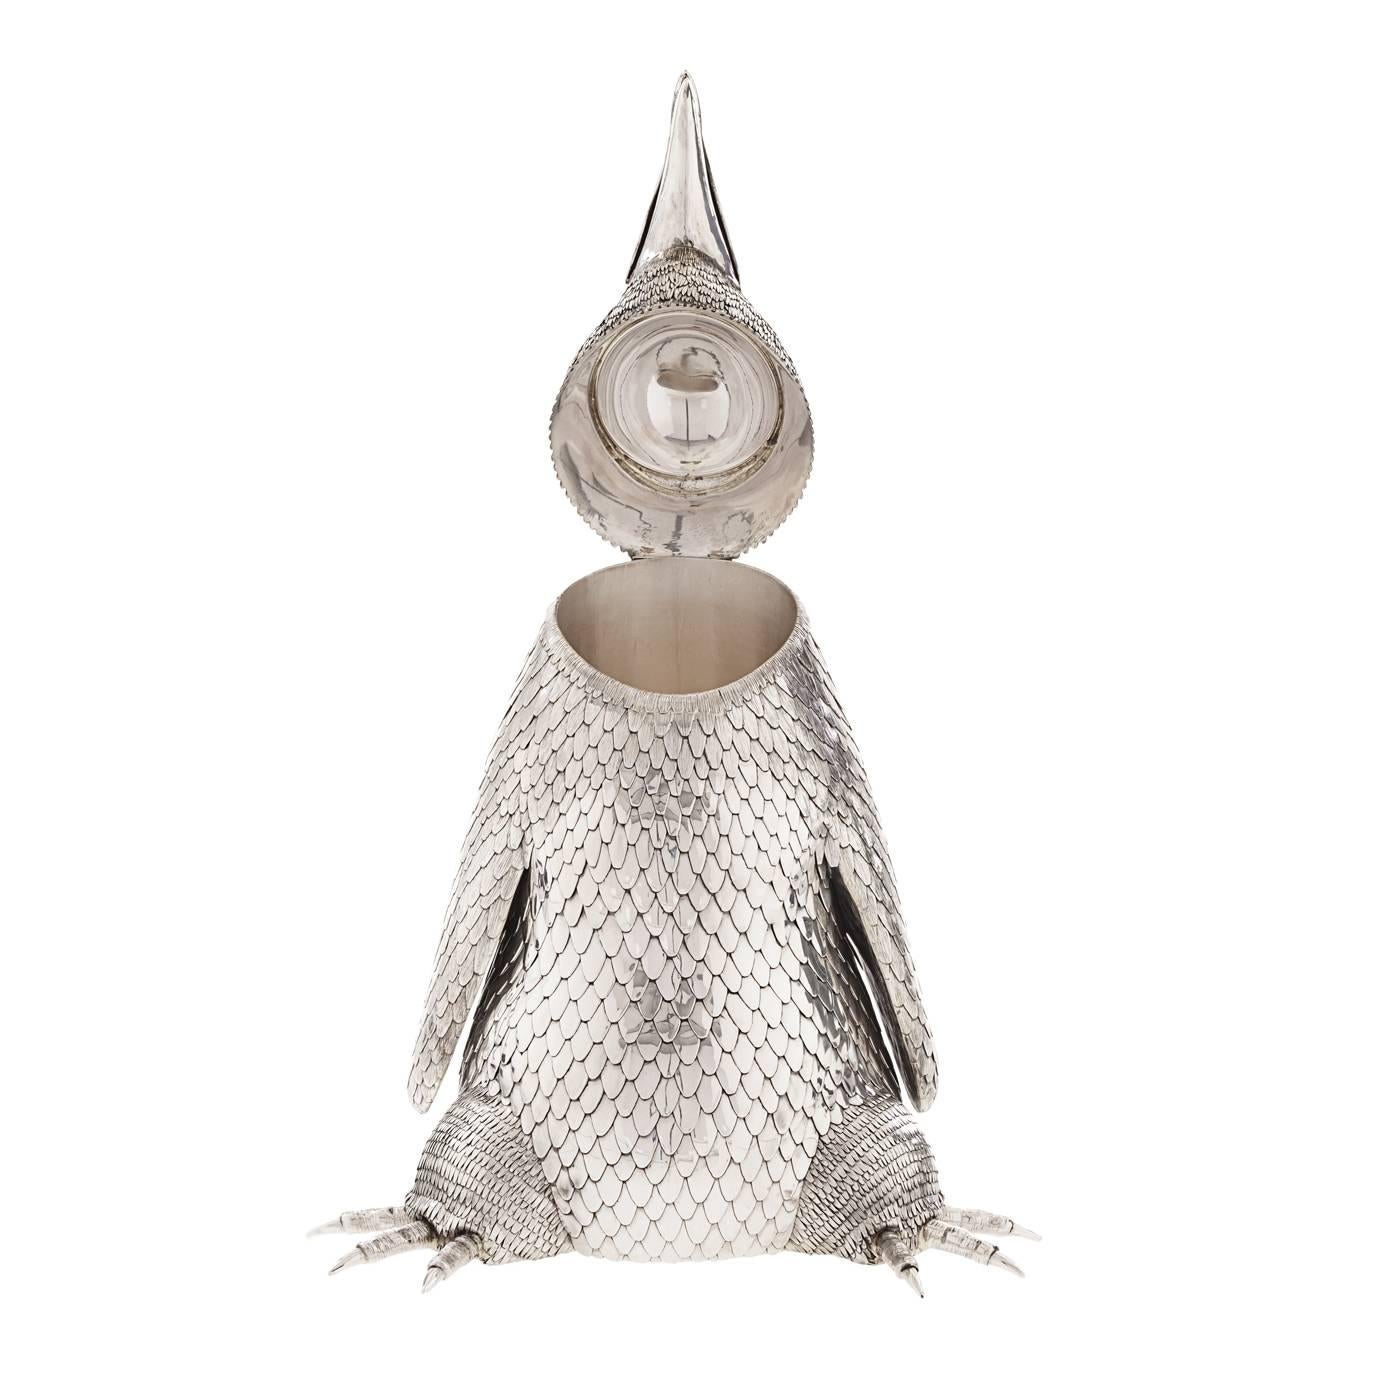 This is a sterling silver champagne bottle holder playfully modeled after a penguin. Its true-to-life quality is remarkable and makes it a very unique protagonist of important dinner tables. The piece is handcrafted with long hours of work and